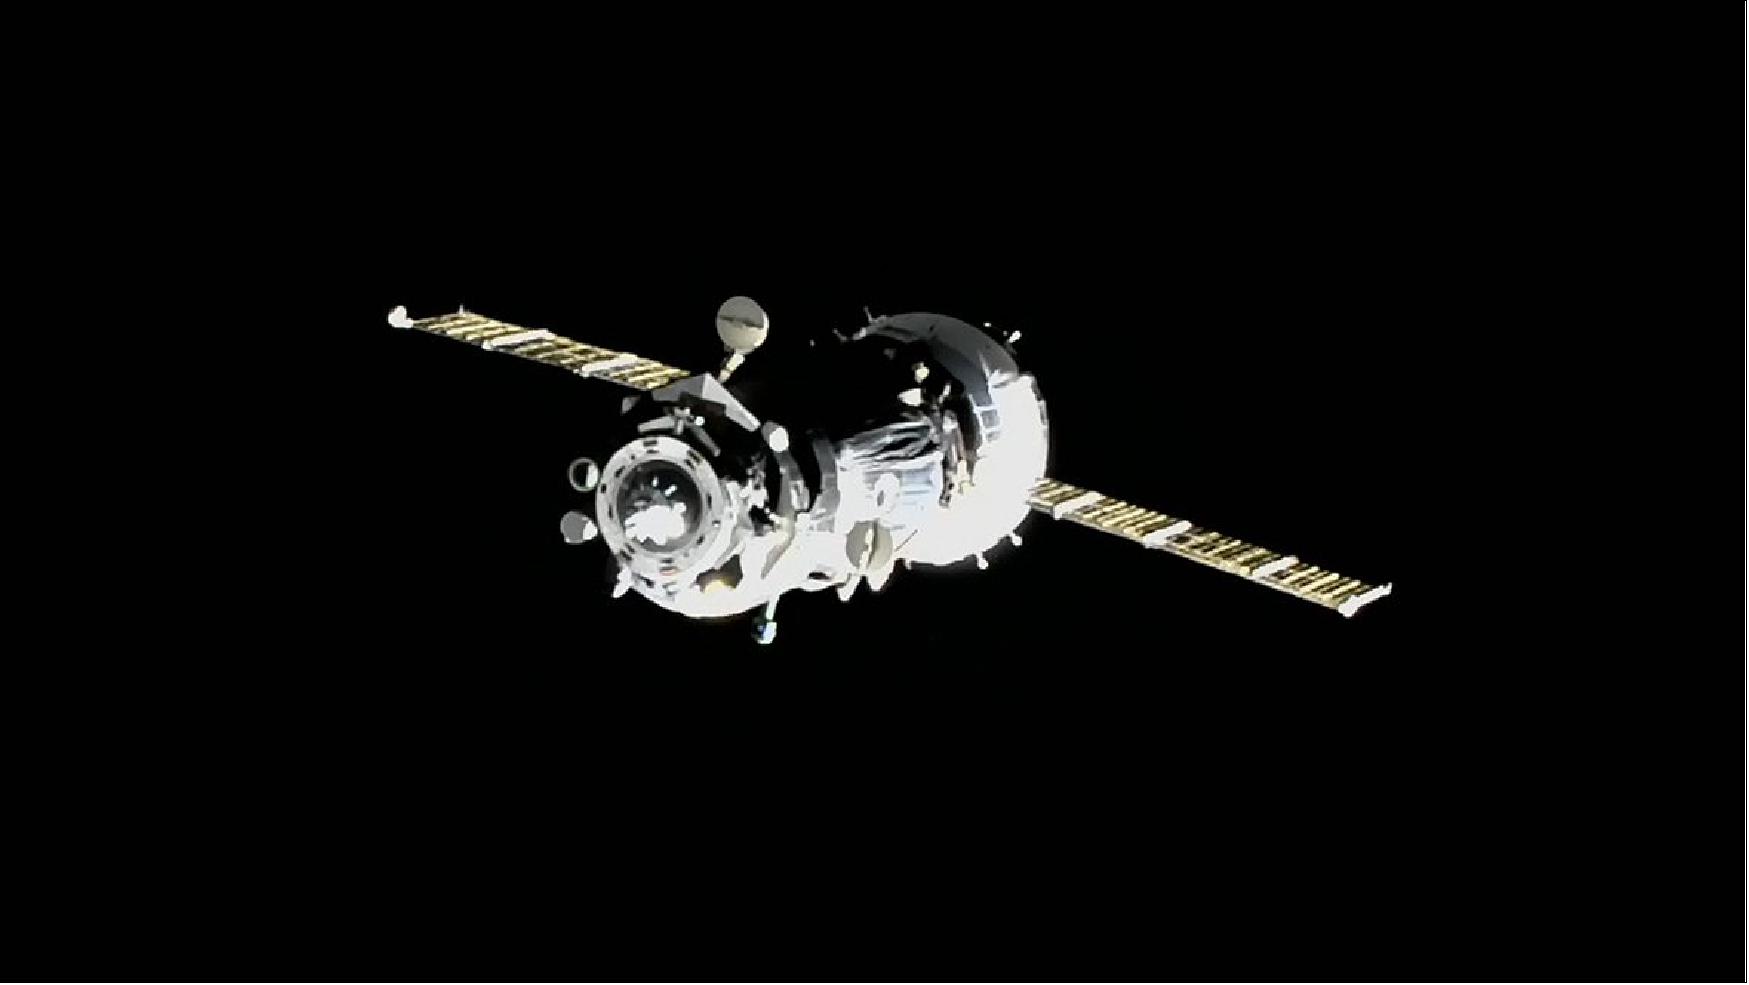 Figure 109: The Soyuz MS-17 crew ship, with three Expedition 64 crew members inside, is pictured after undocking from the Rassvet module beginning its short trip to the Poisk module (image credit: NASA TV)